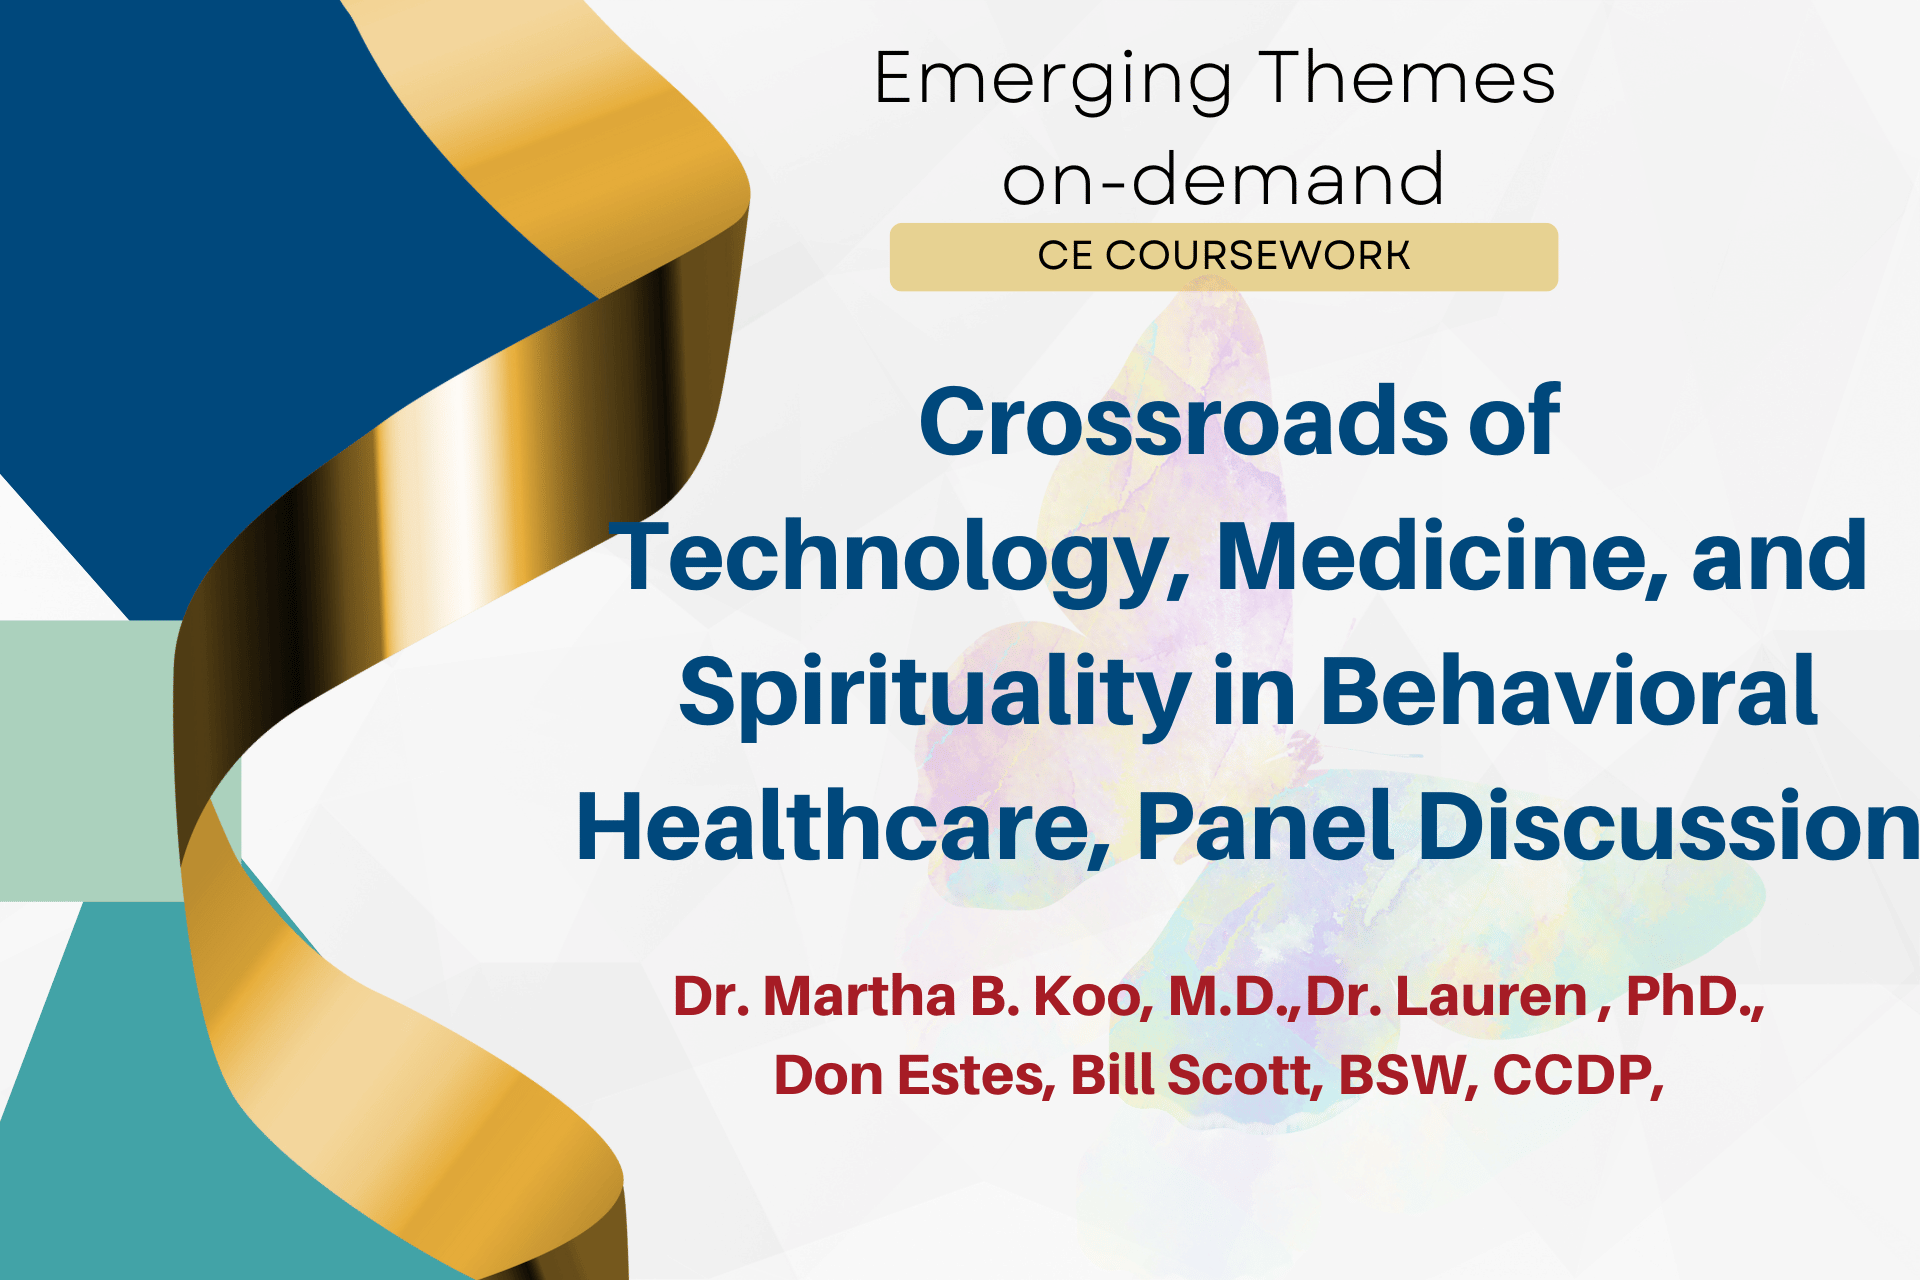 Crossroads of Technology, Medicine, and Spirituality in Behavioral Healthcare, Panel Discussion